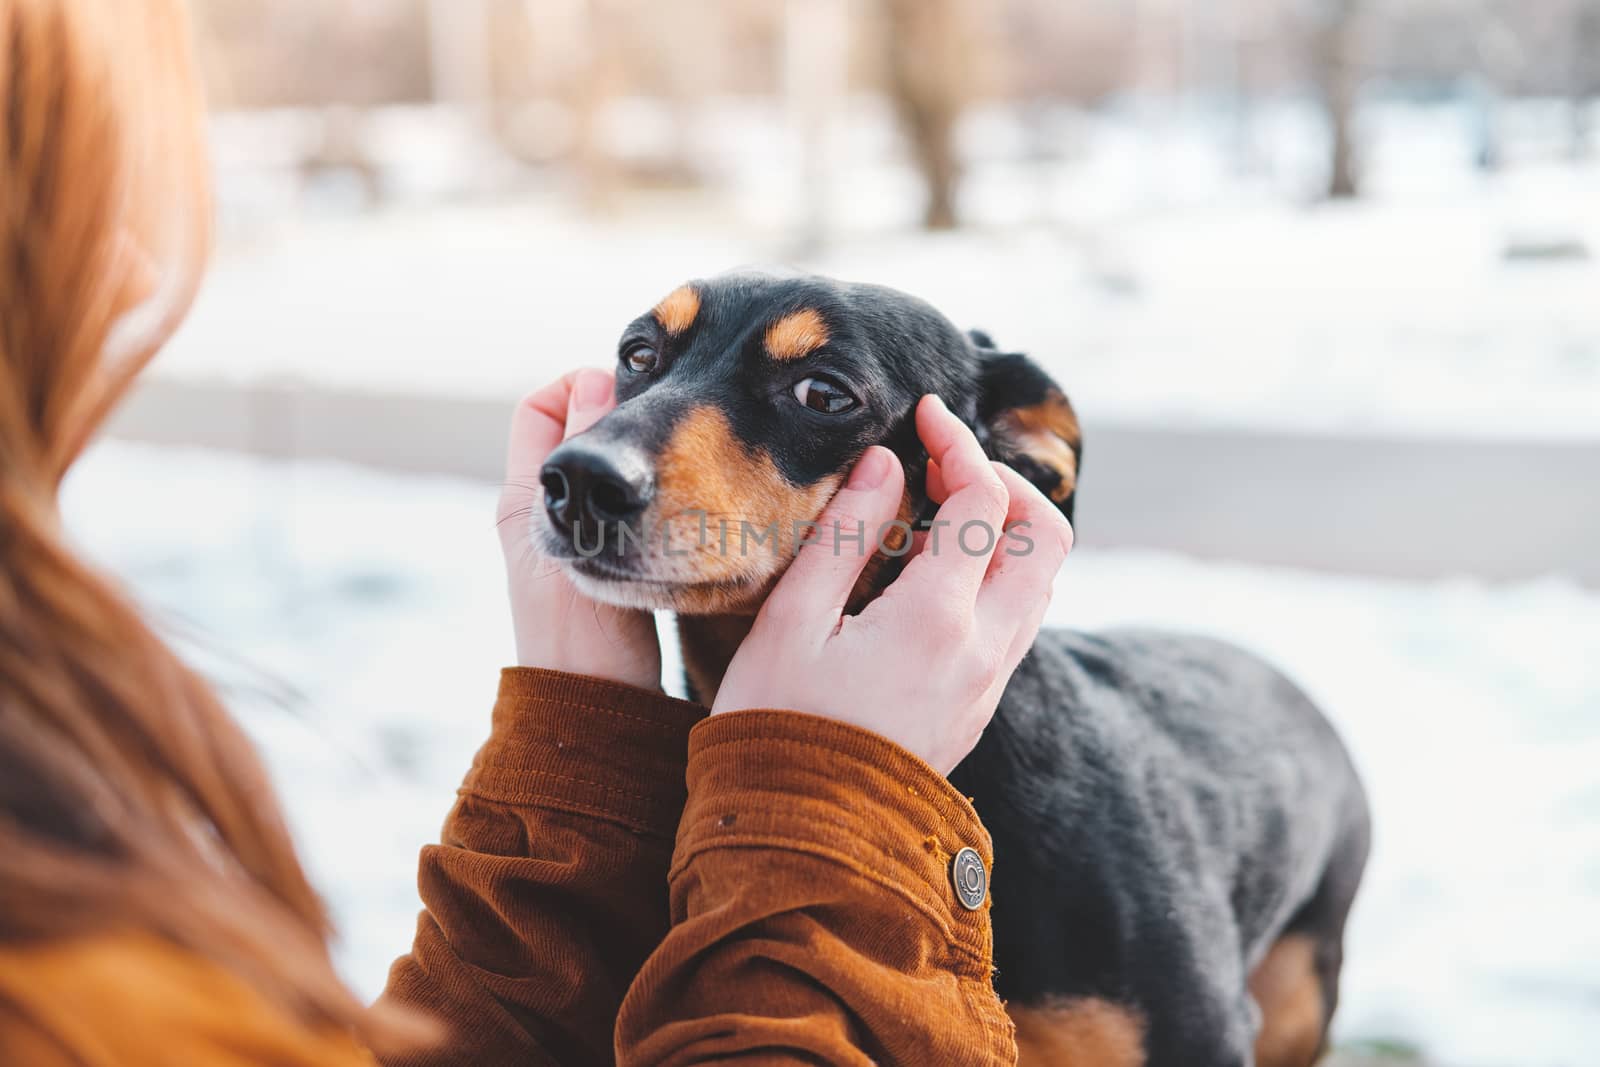 Woman holding a dachshund in her hands by photoboyko